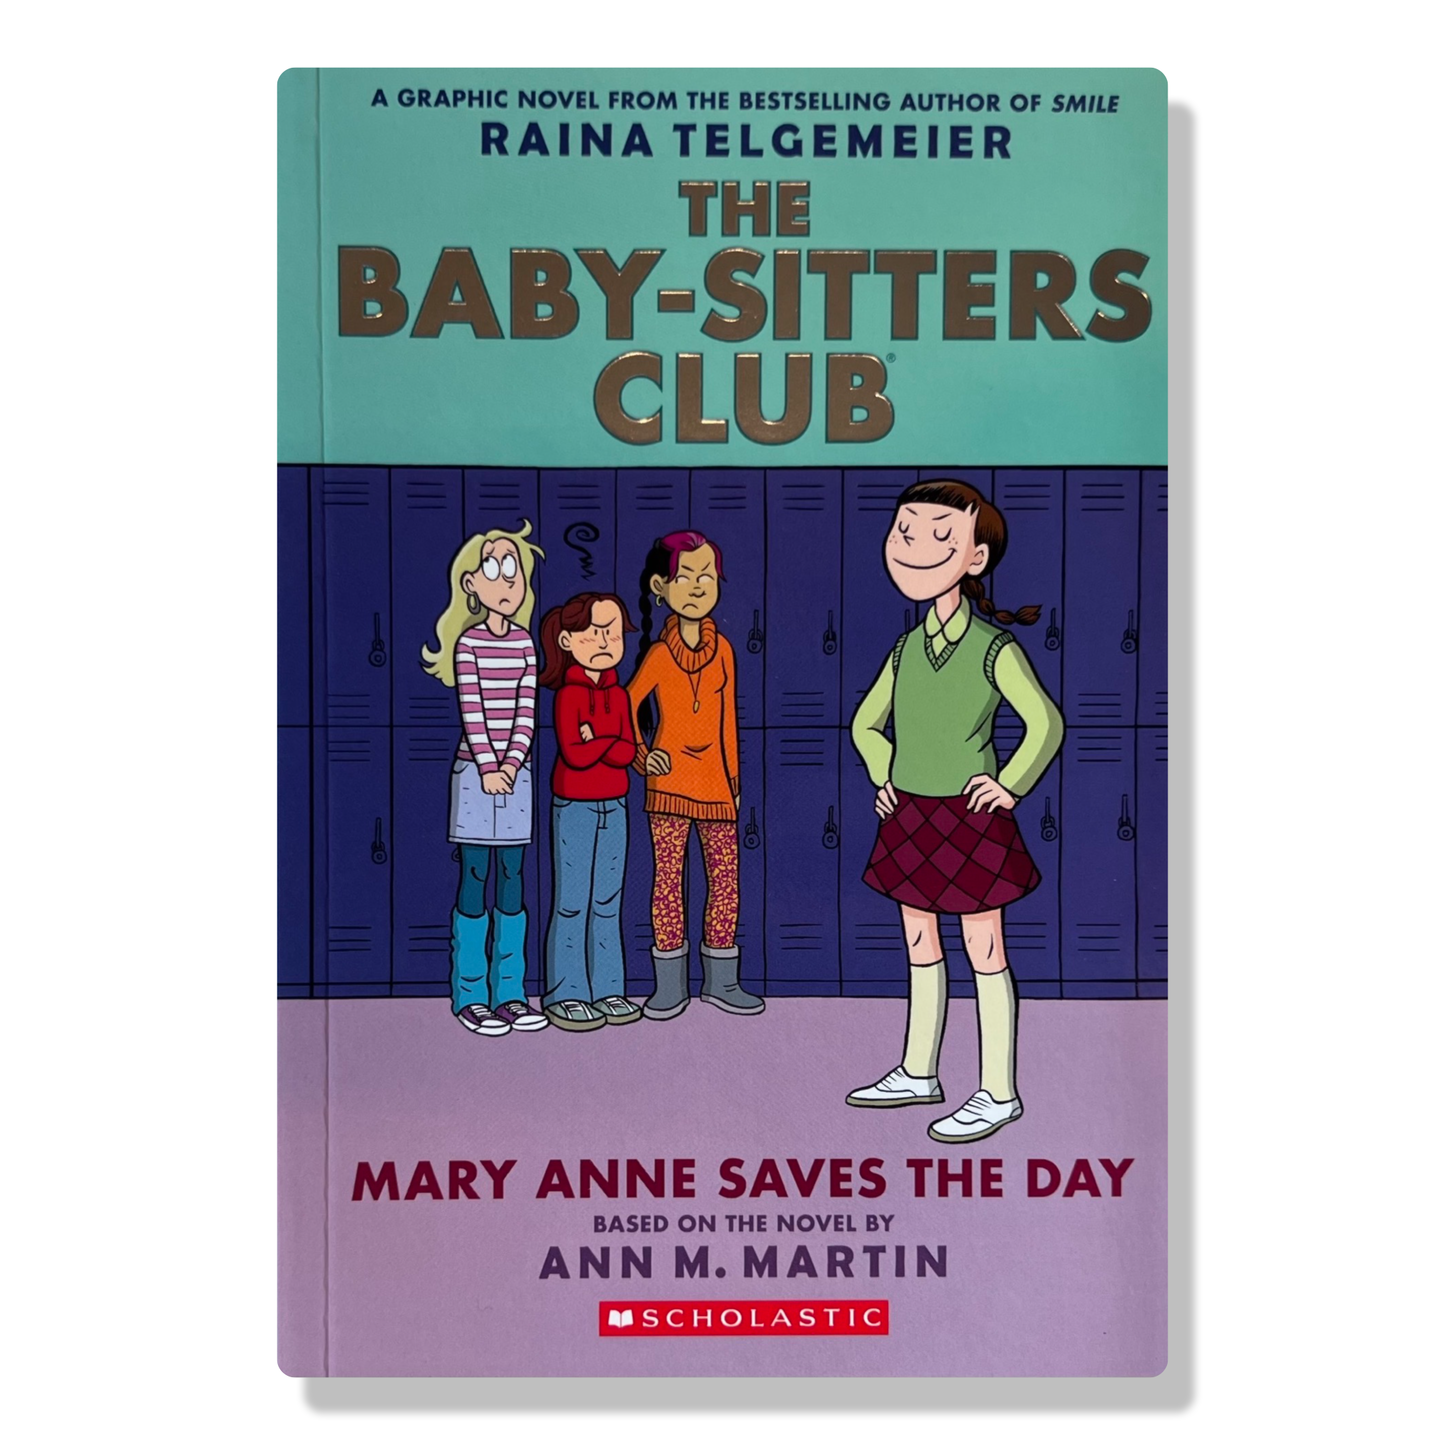 Mary Anne Saves the Day: A Graphic Novel (the Baby-Sitters Club #3) (Revised Edition)